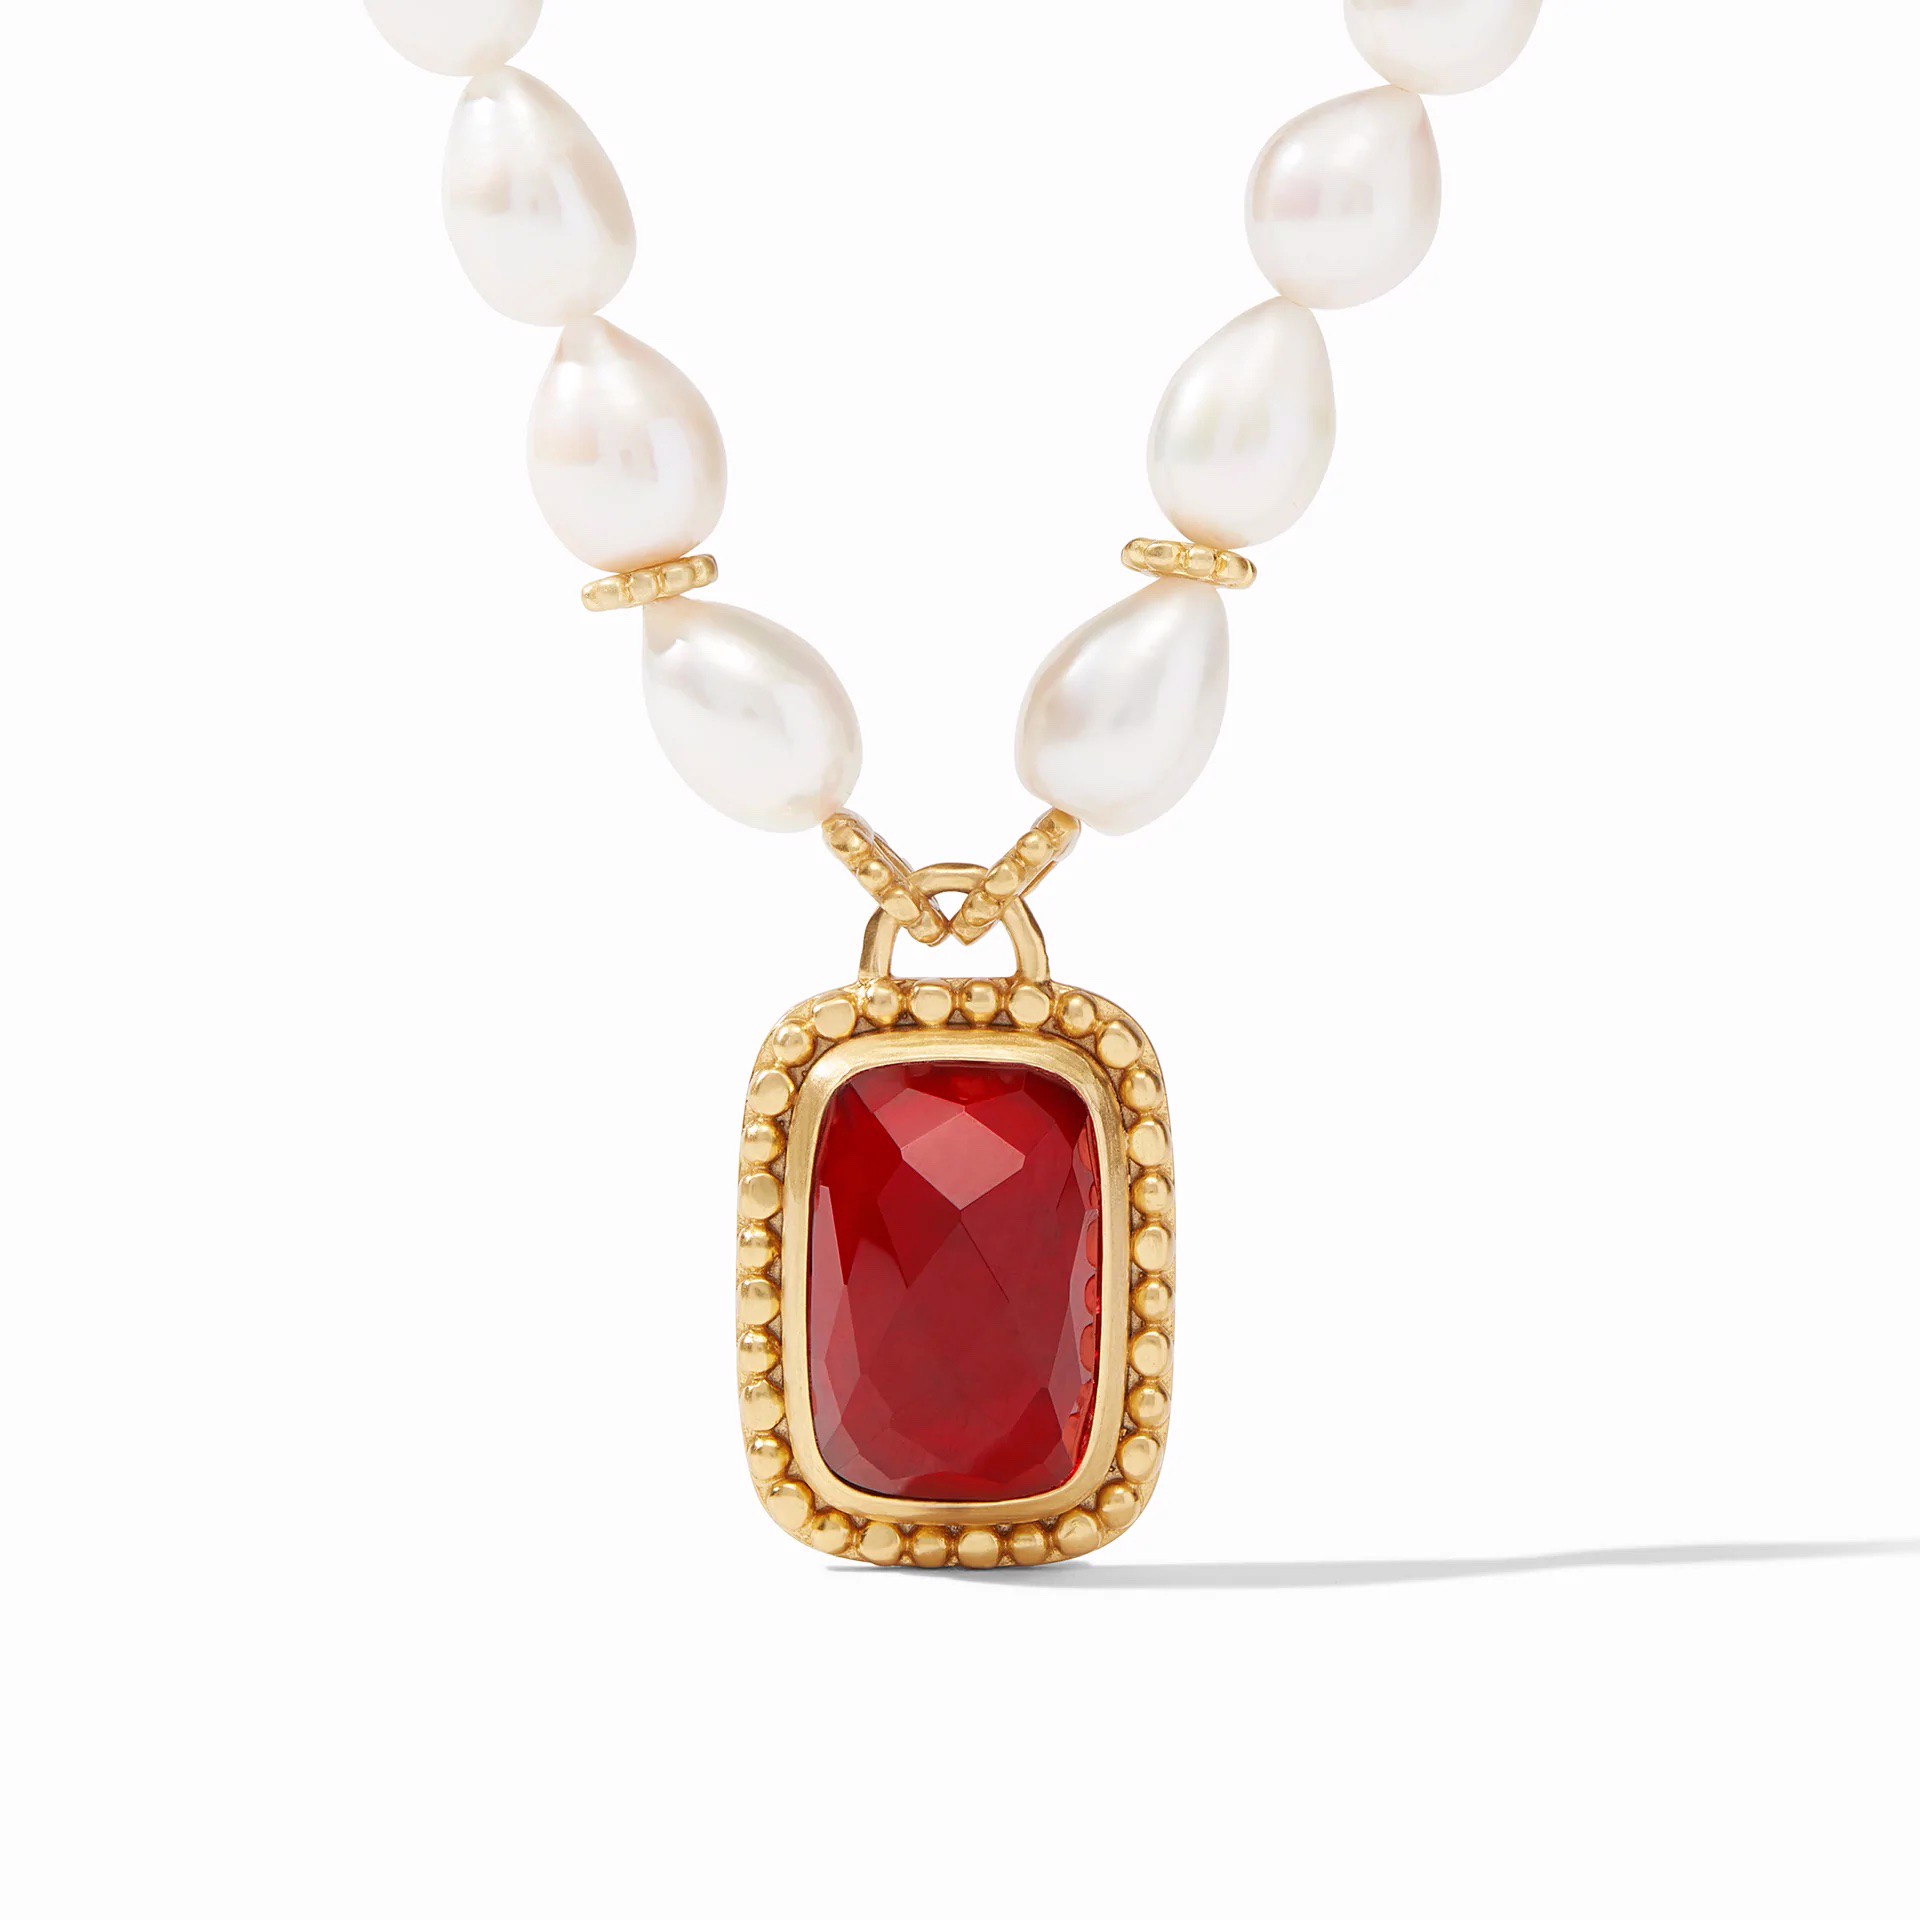 Marbella Statement Necklace - Ruby Red by Julie Vos